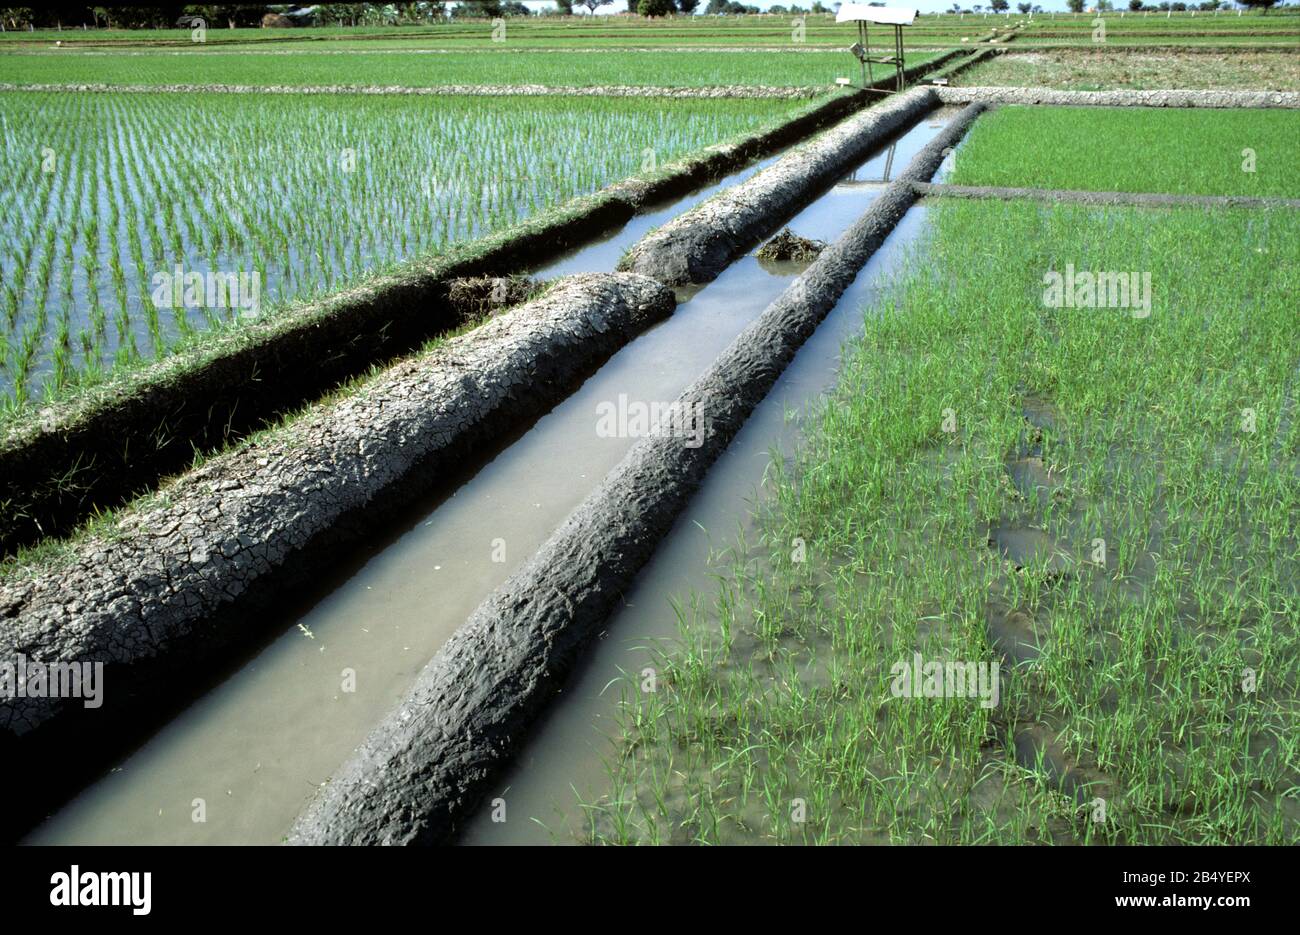 Newly repaired neat, mud levies for irrigation water in young seedling paddy rice fields, Luzon, Philippines Stock Photo